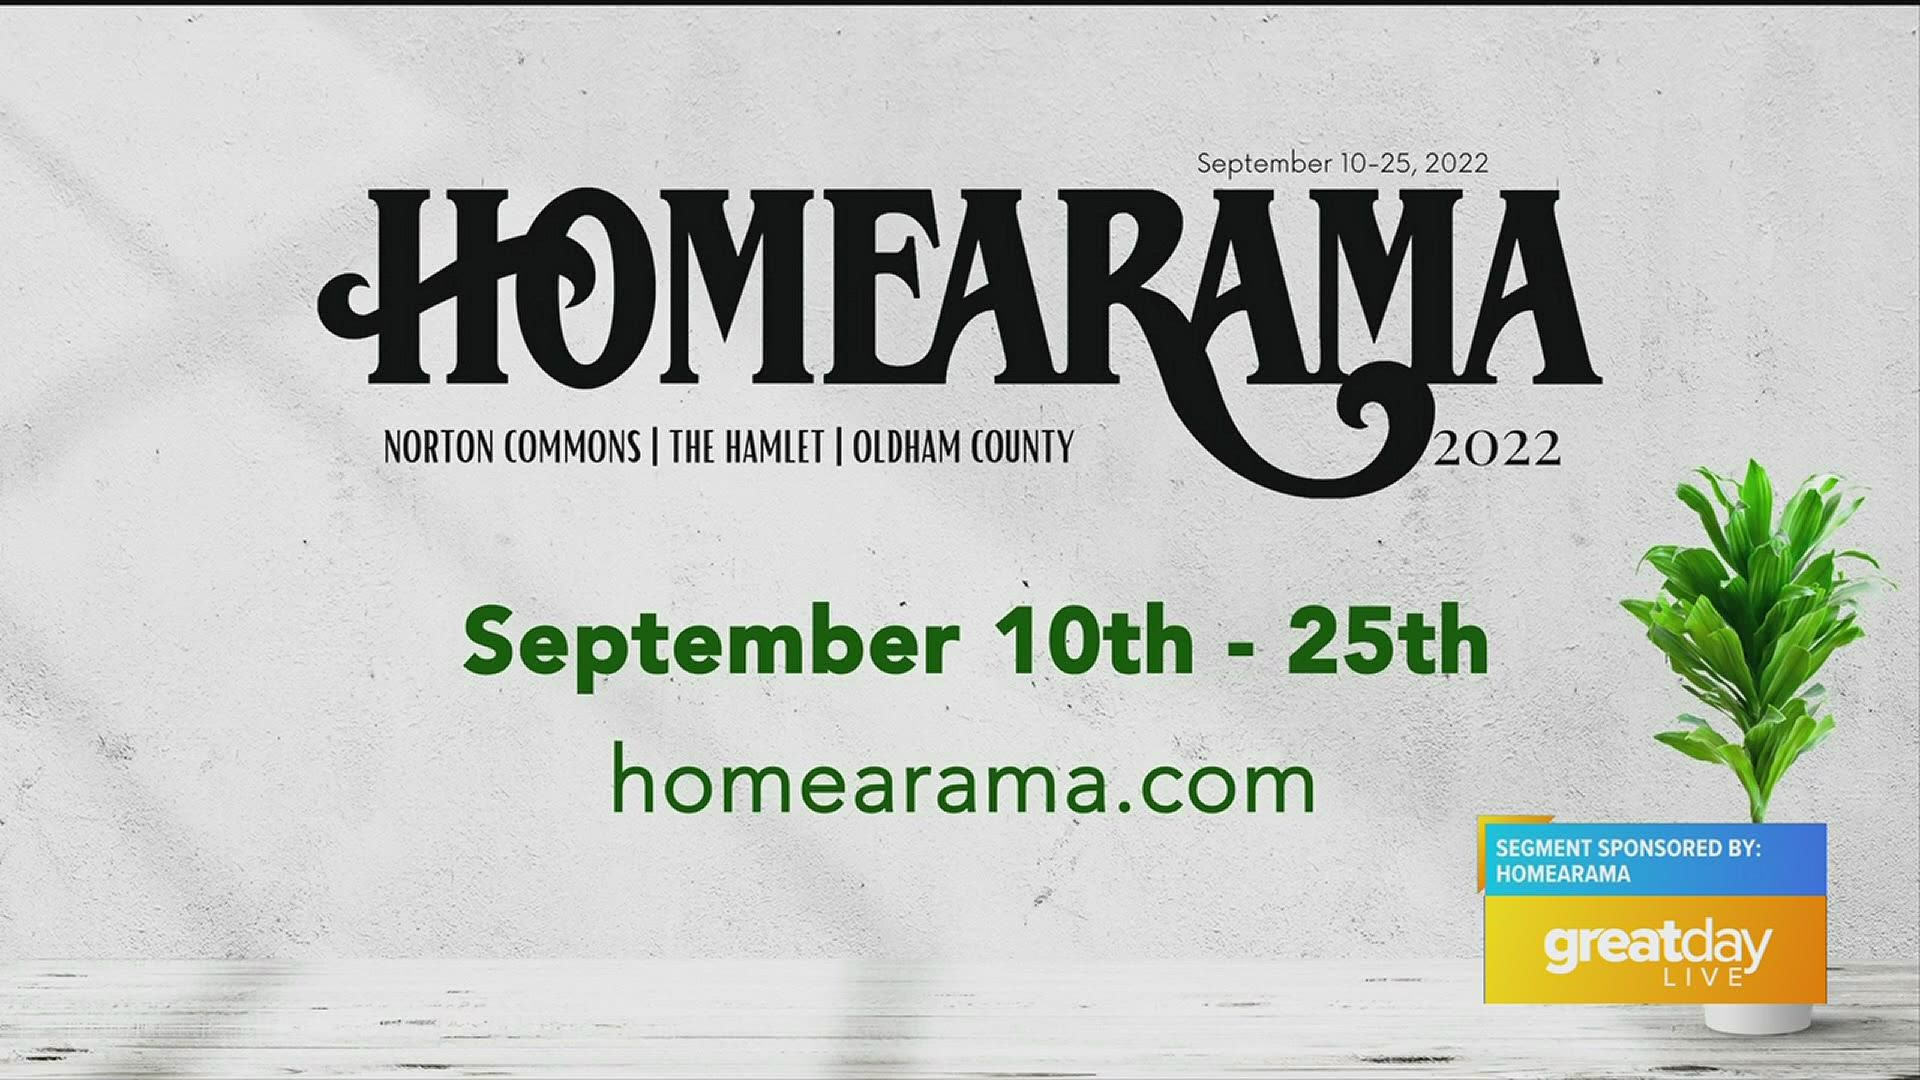 For tickets, information, or to take a virtual tour, visit homearama.com.